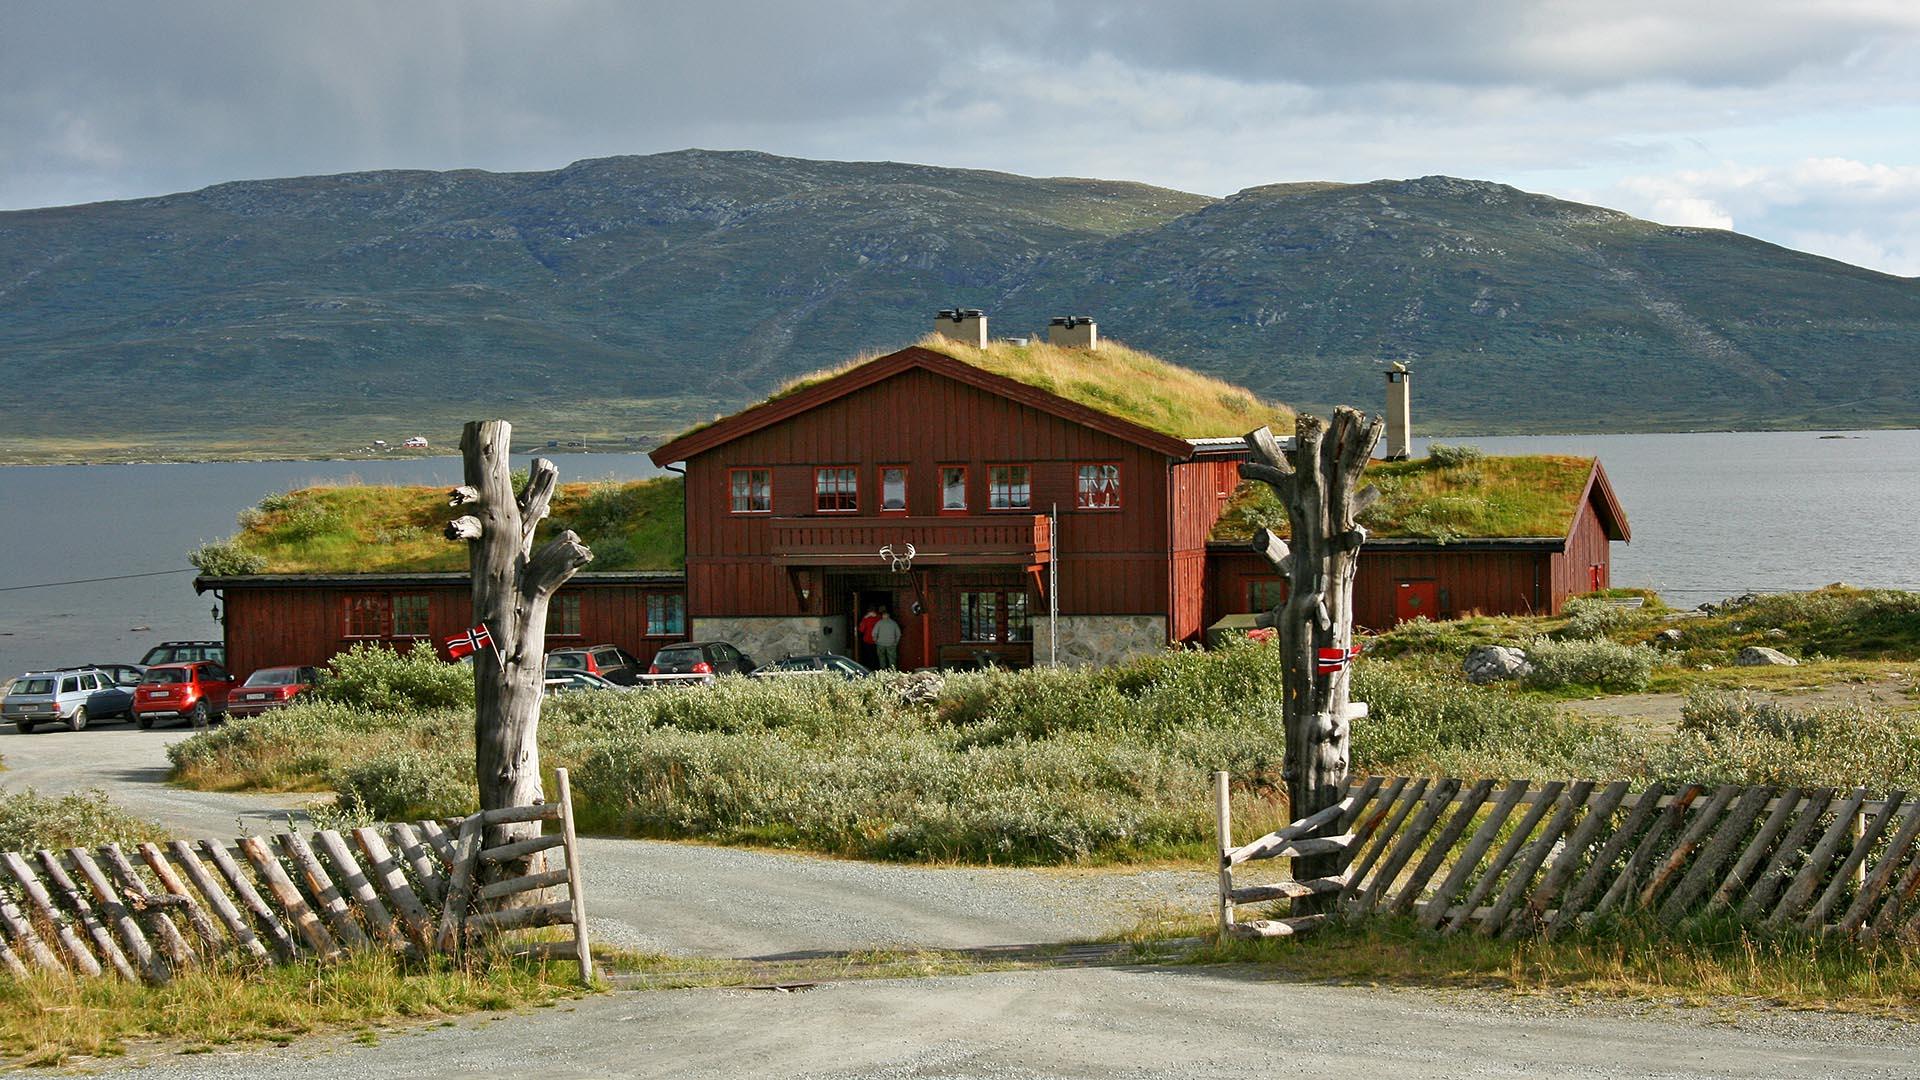 A lodge with a grass roof on a lakefront in open mountainous country